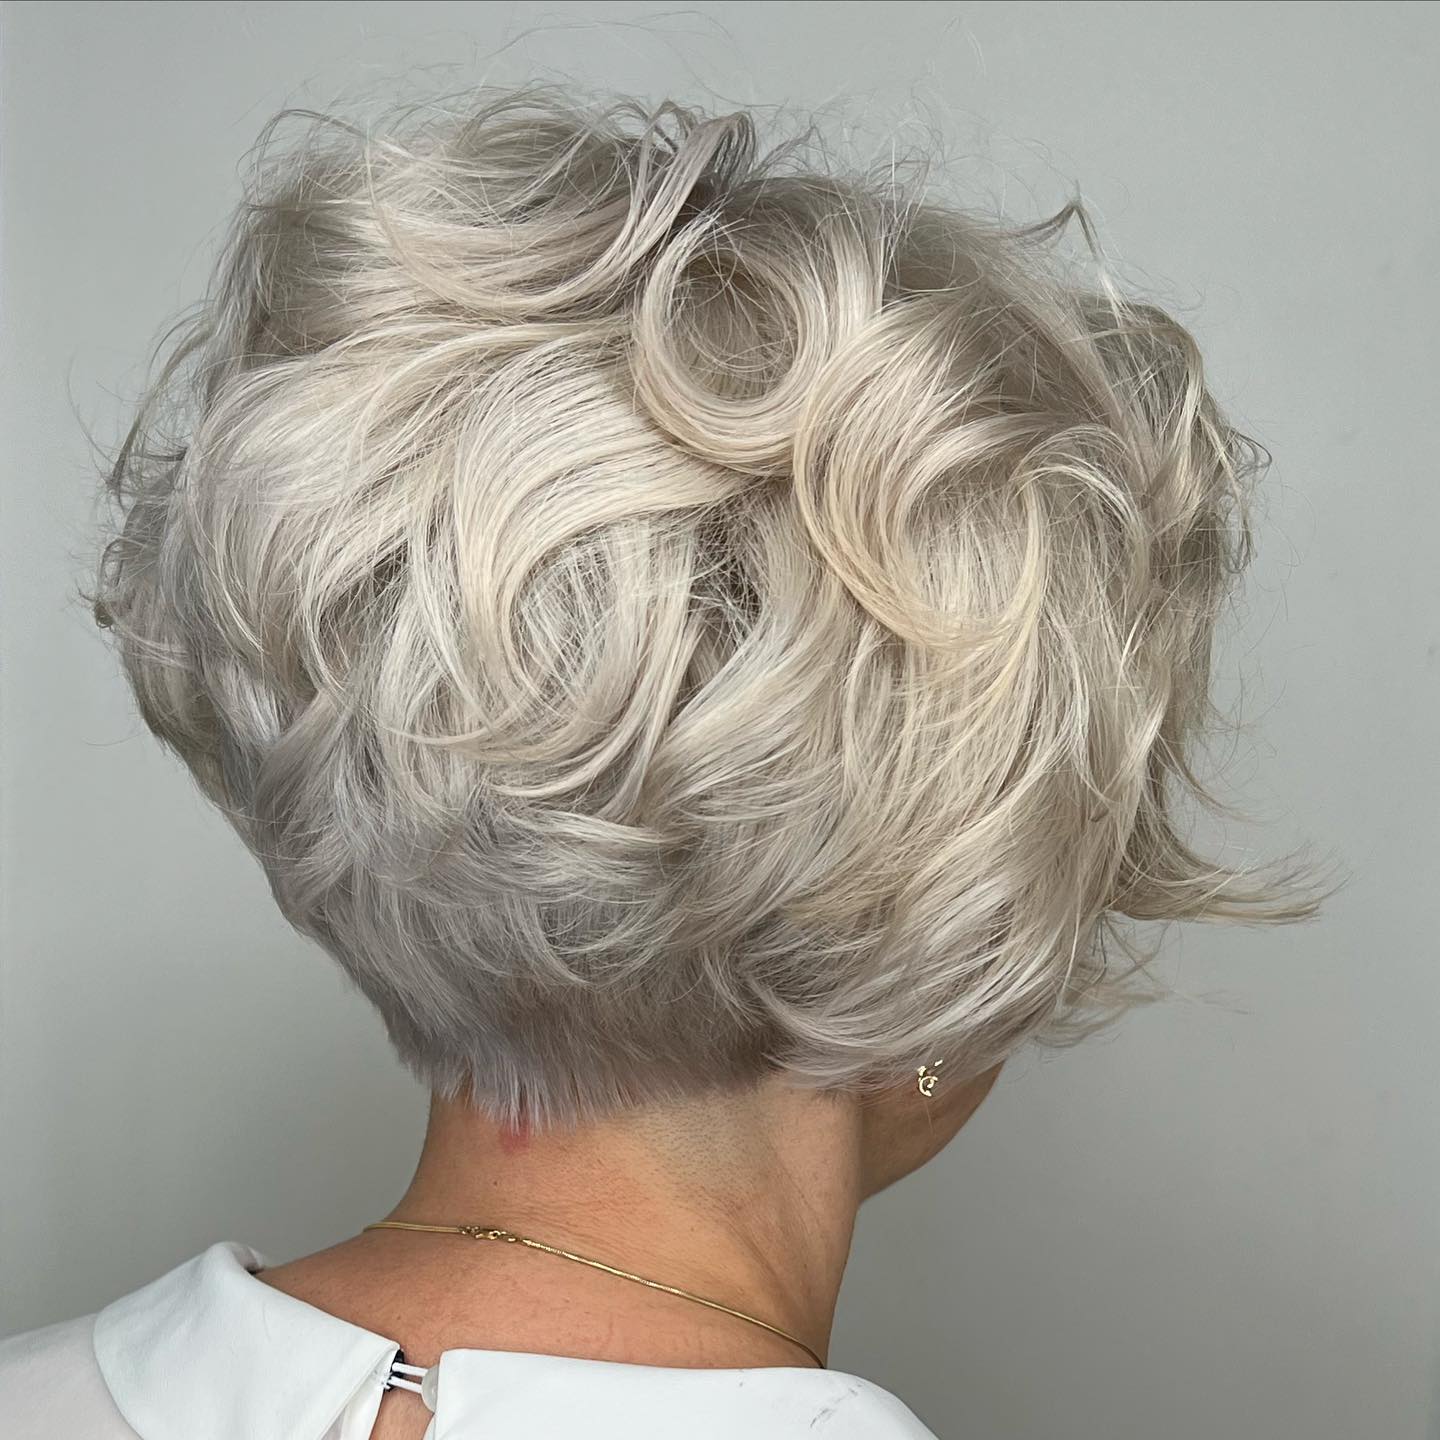 Graduated haircuts for short hair: 15 stylish ideas that will refresh your look